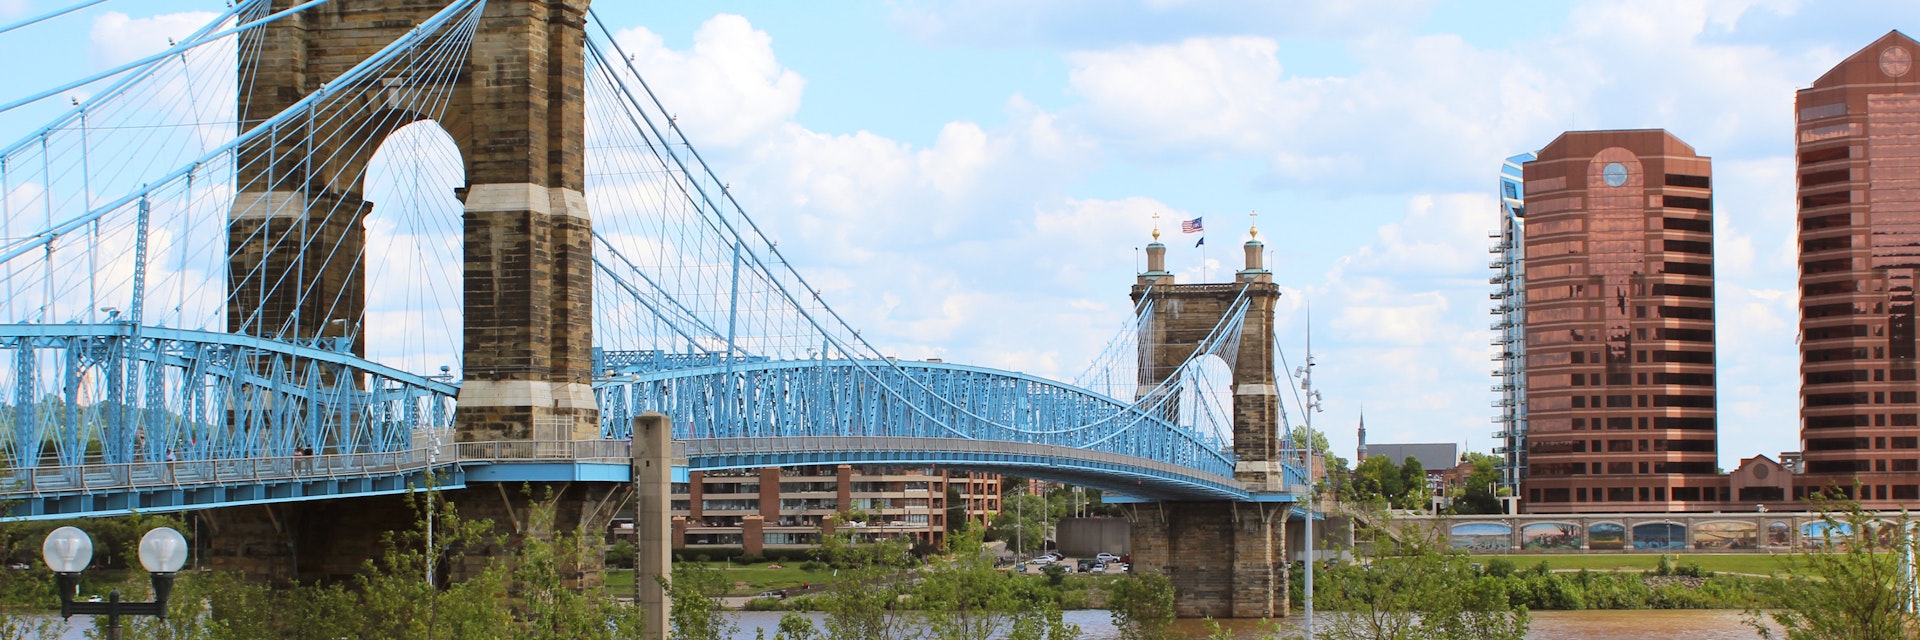 A landscape view of Cincinnati's Smale Riverfront Park and the Roebling Suspension Bridge that crosses over the Ohio River and connects Cincinnati, Ohio to Covington, Kentucky.